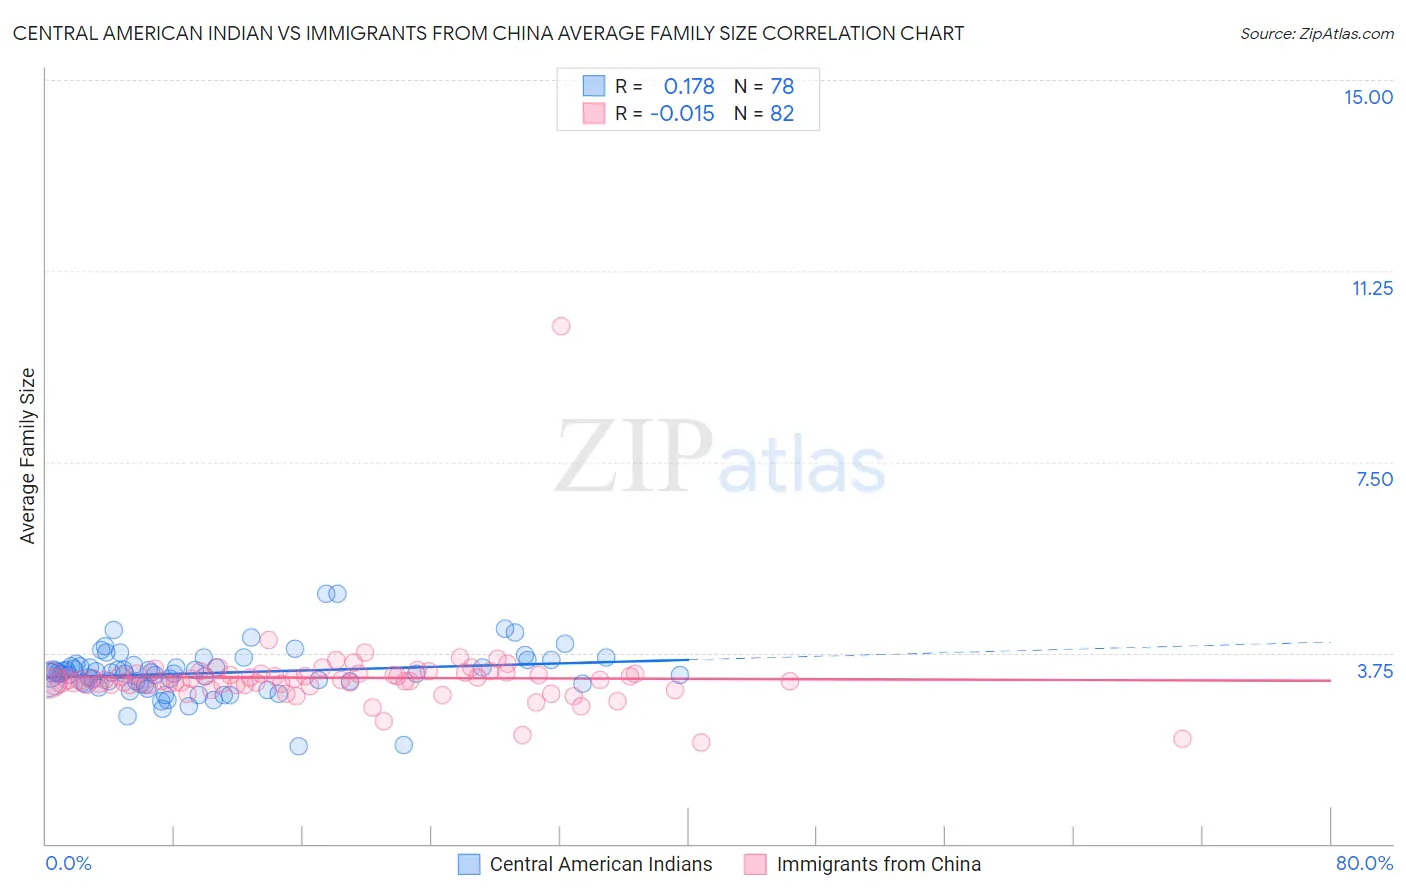 Central American Indian vs Immigrants from China Average Family Size